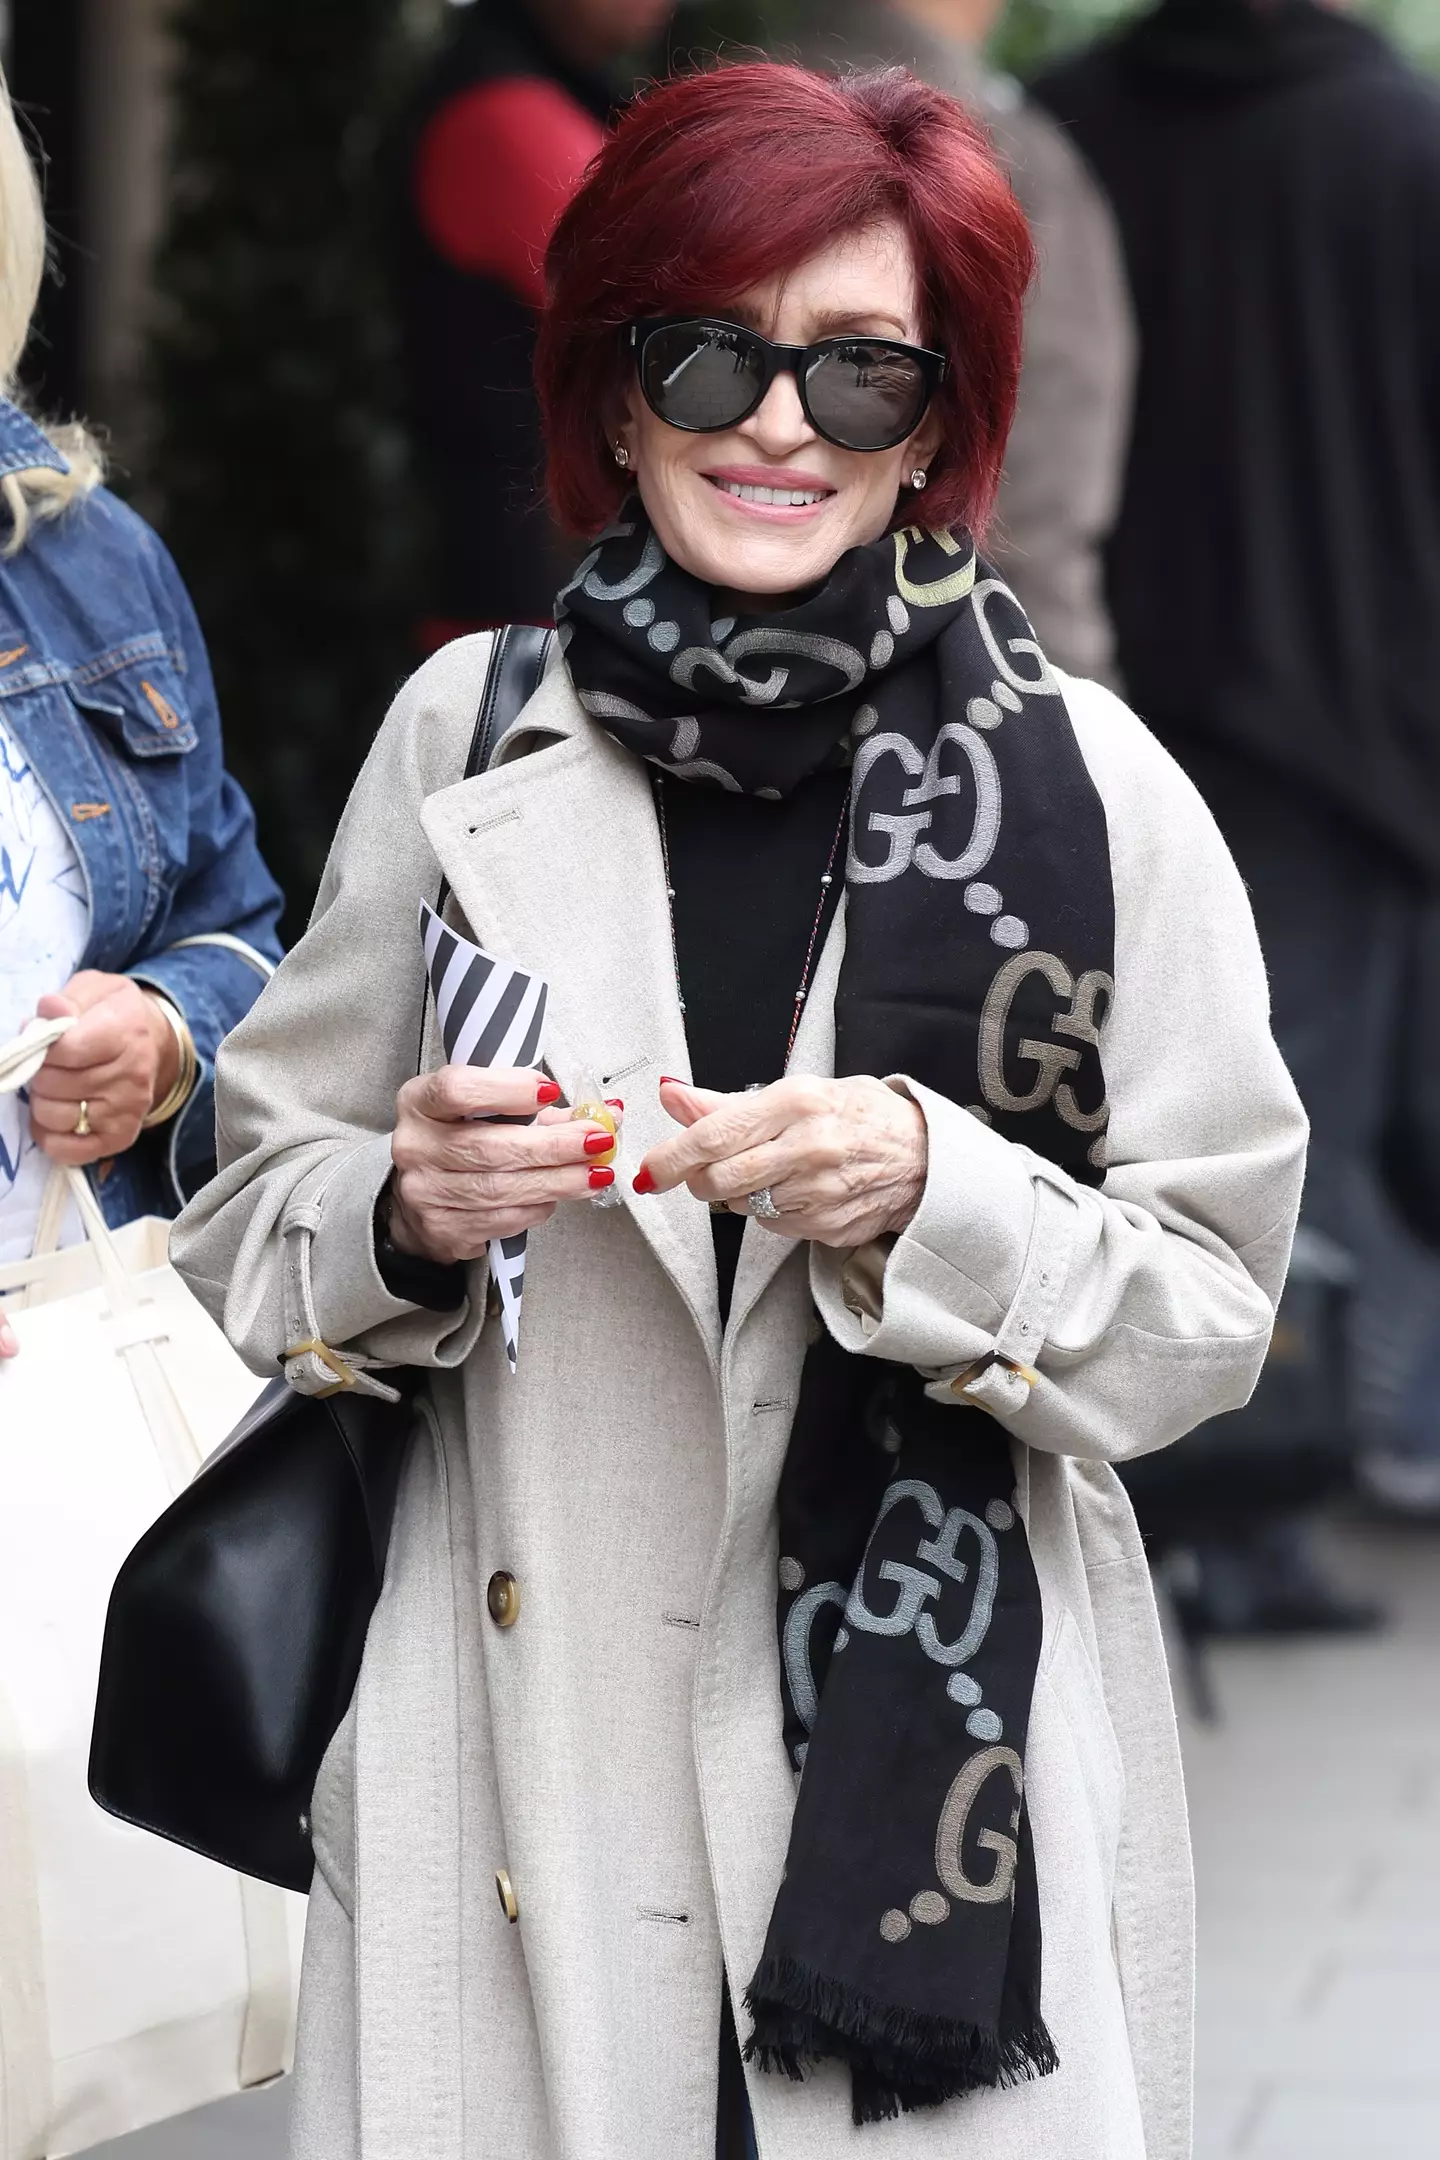 Sharon Osbourne has opened up about her weight loss journey.